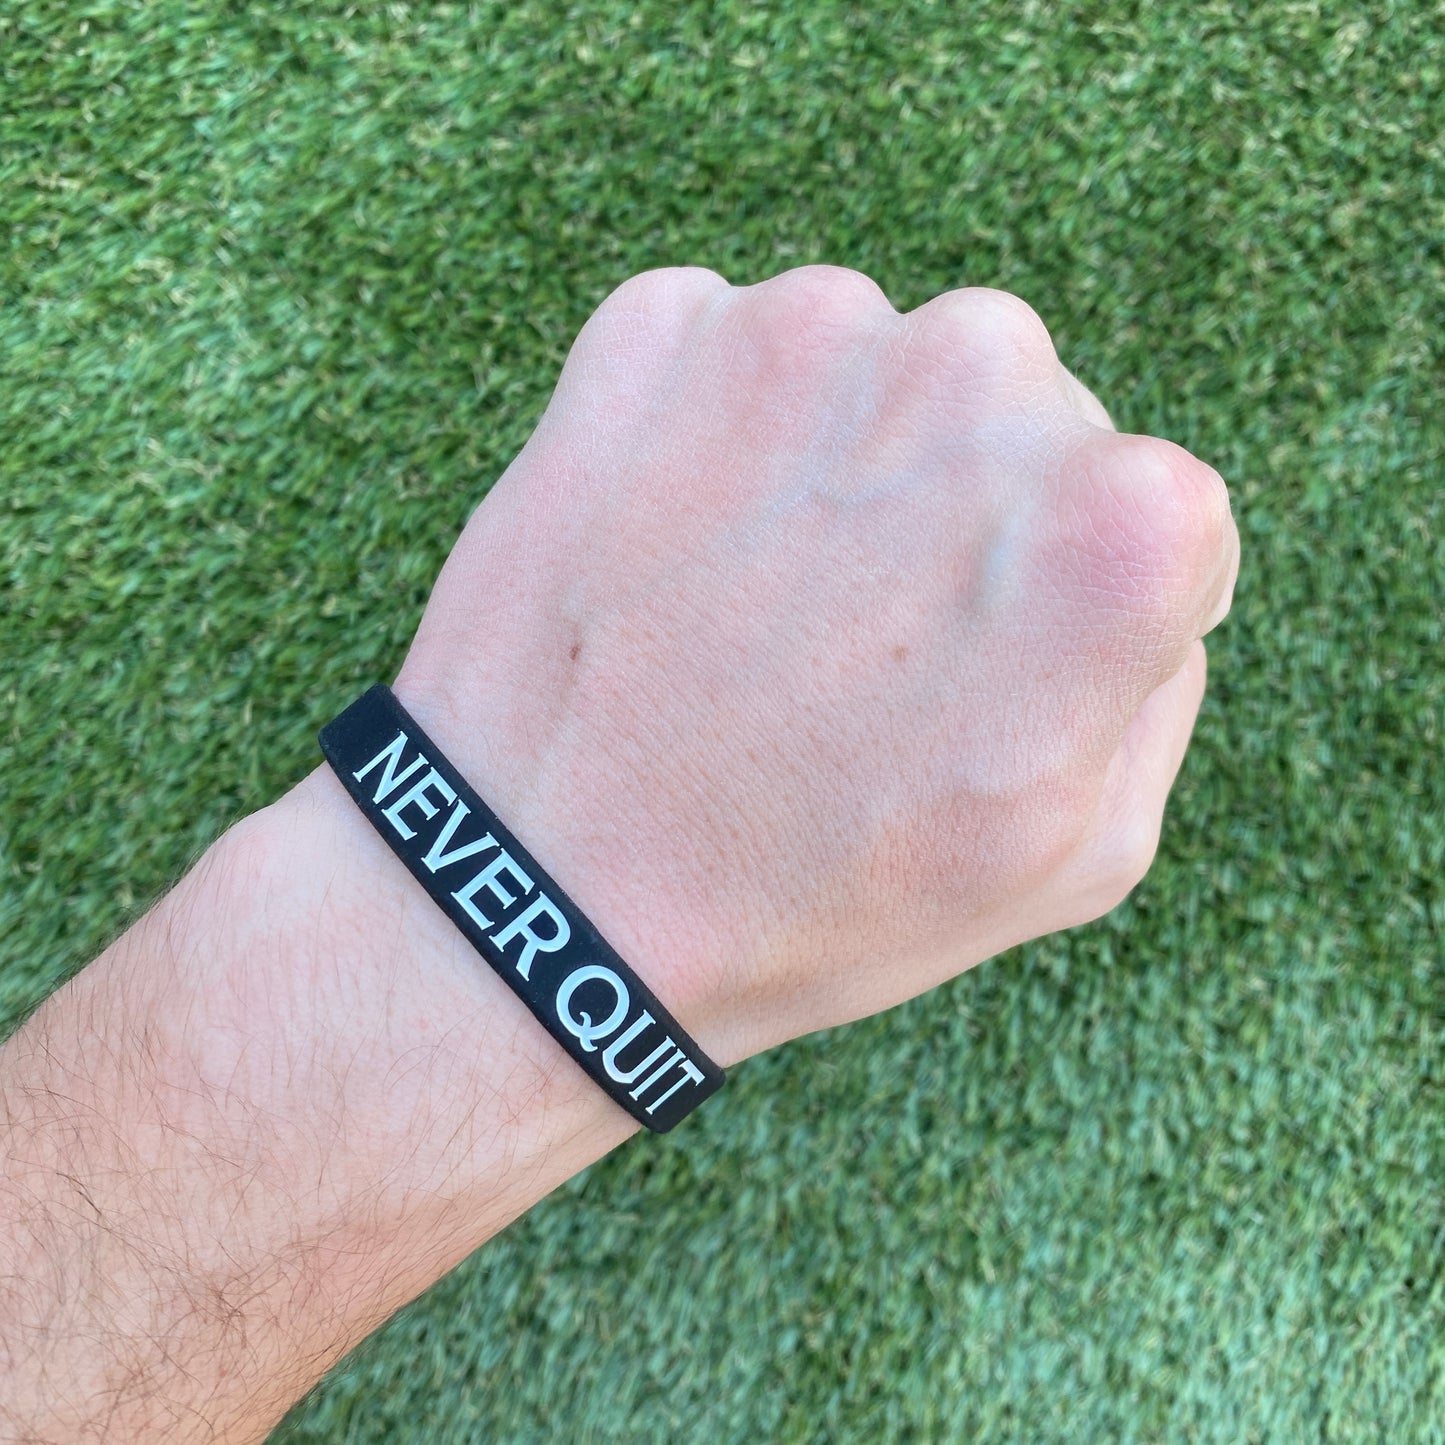 NEVER QUIT Wristband